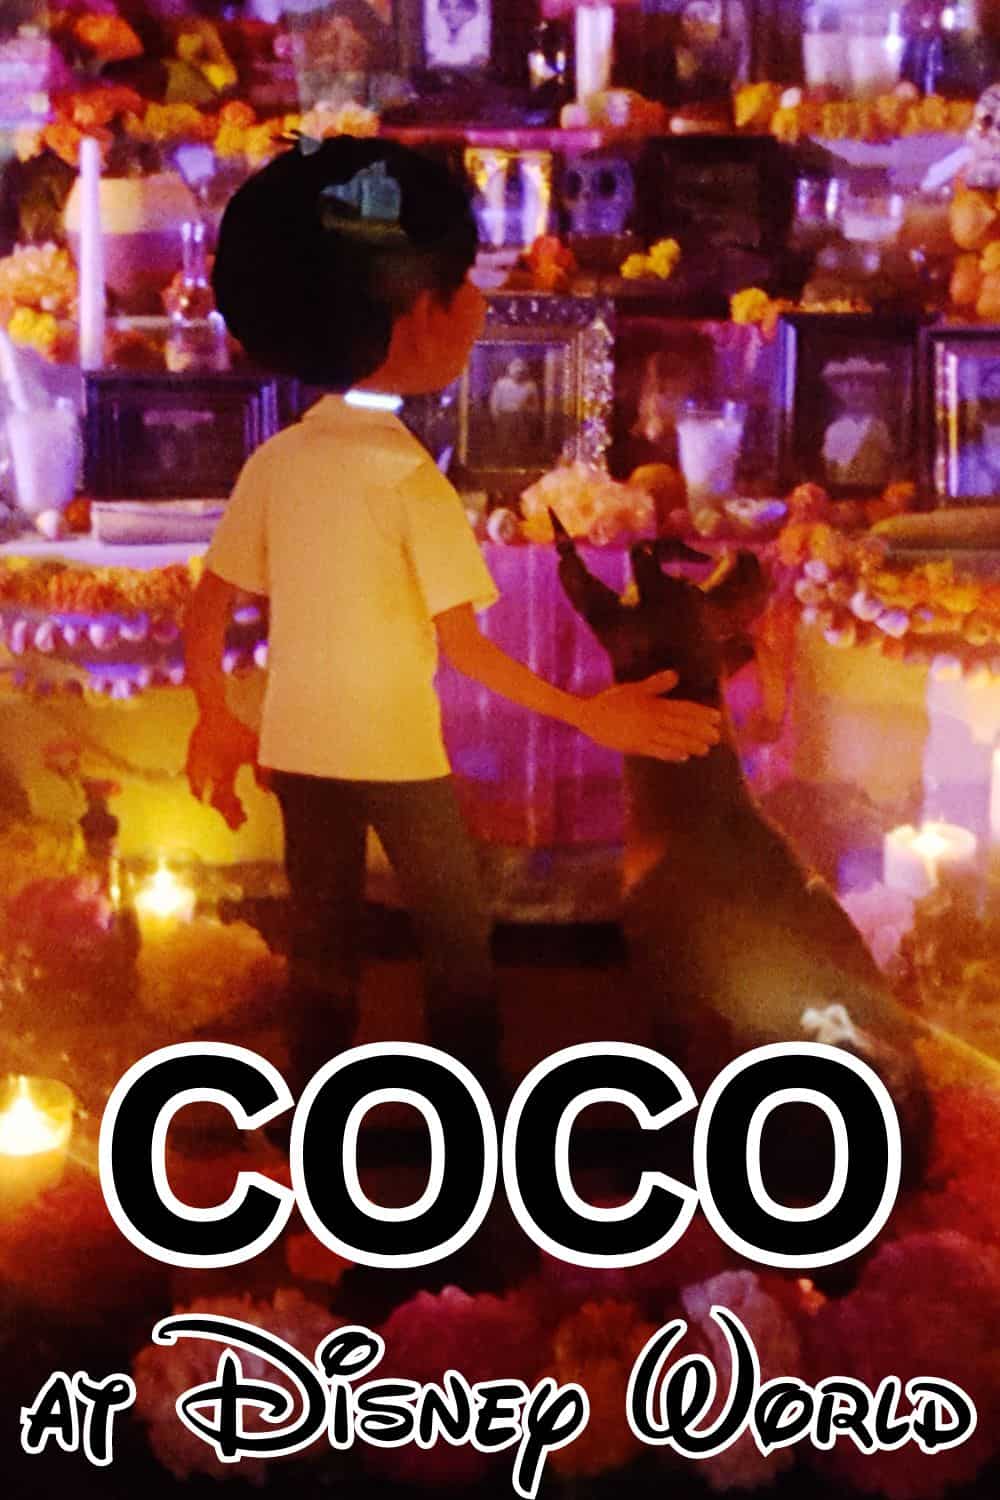 Where to find Movie References to Coco at Disney World